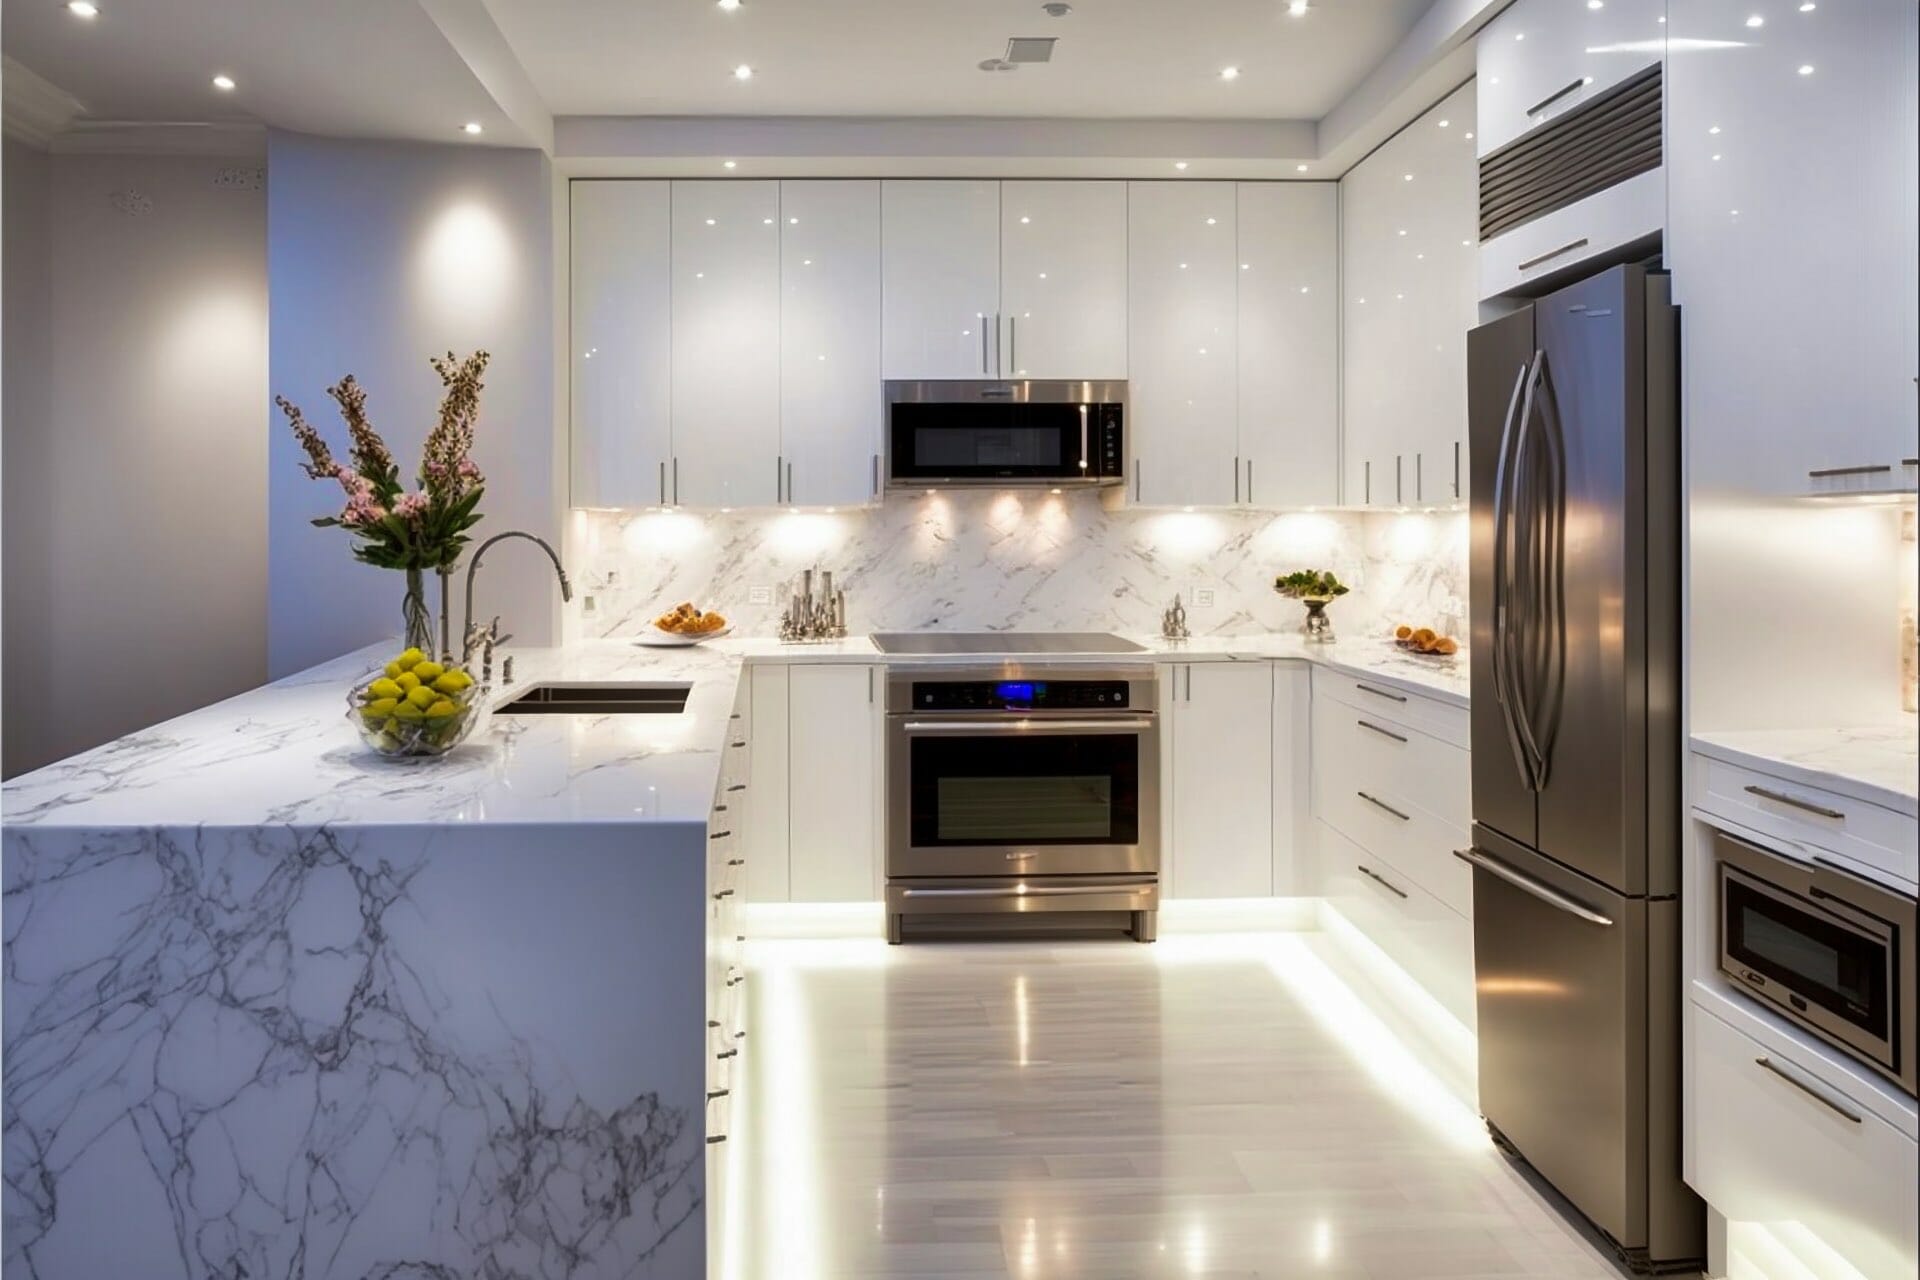 This Design Showcases A Sleek And Modern Kitchen With Glossy White Cabinetry, Marble Countertops, And Stainless Steel Appliances. The Marble Backsplash Adds An Elegant Touch, While The Under-Cabinet Lighting Completes The Look.